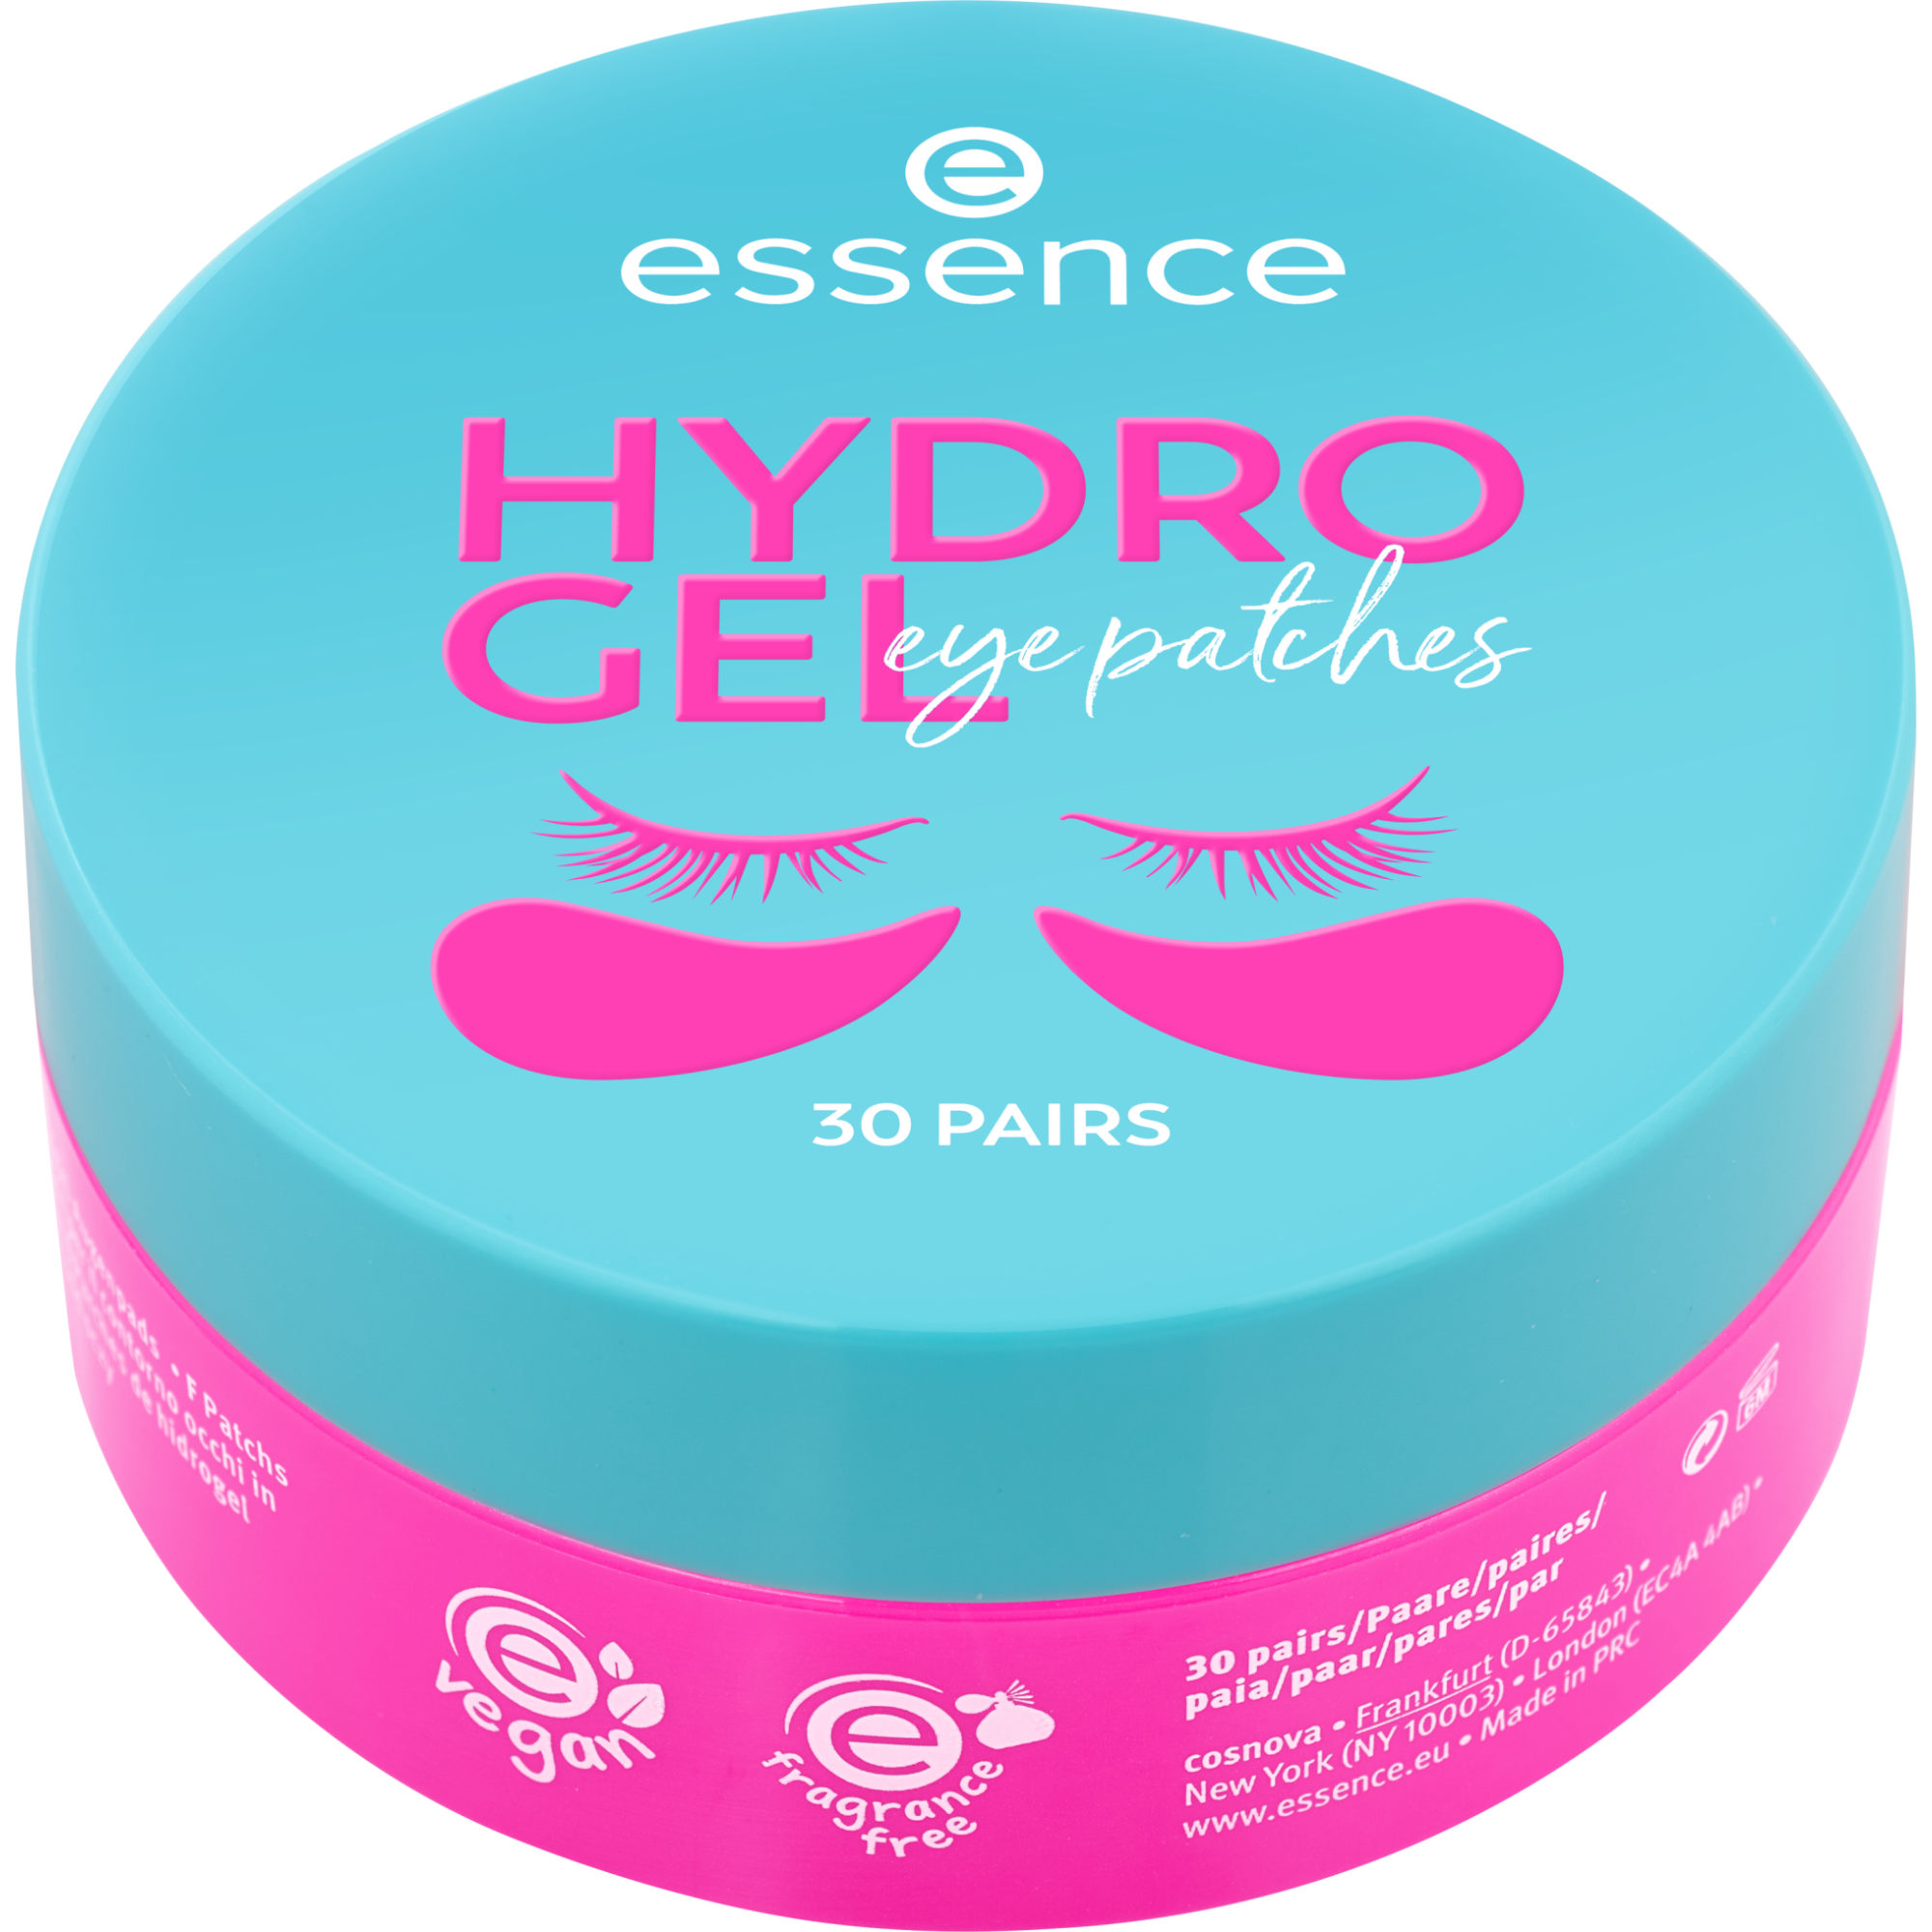 HYDRO GEL eye patches 30 PAIRS